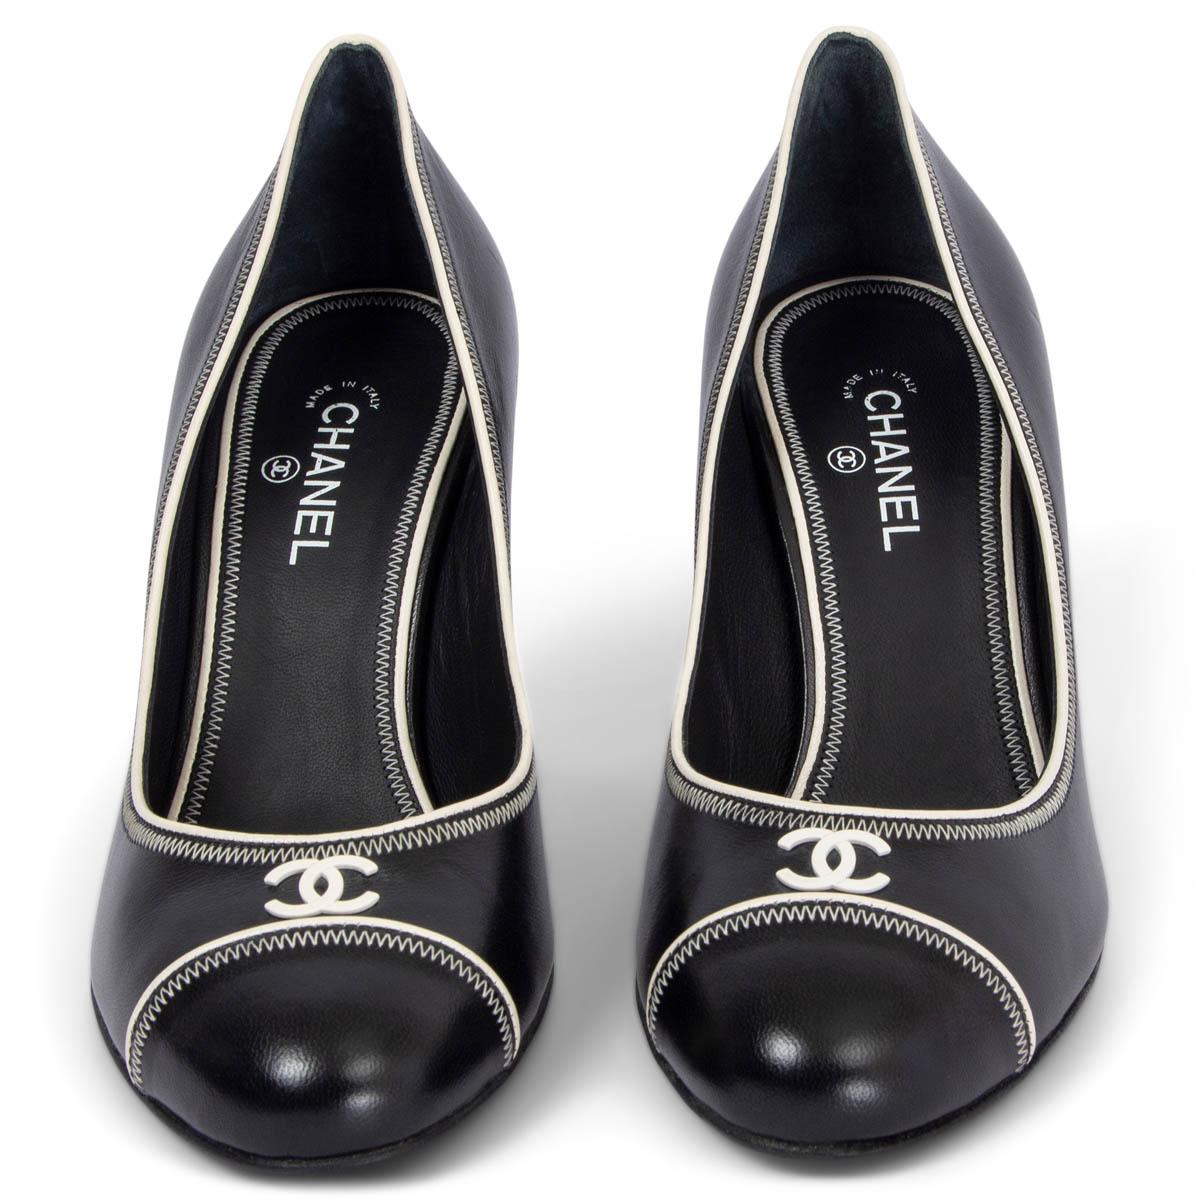 100% authentic Chanel round-toe pumps in black smooth calfskin with white contrast stitching and piping. CC logo embellishment on tip. Brand new. 

Measurements
Imprinted Size	36C
Shoe Size	36
Inside Sole	22.5cm (8.8in)
Width	6.5cm (2.5in)
Heel	8cm